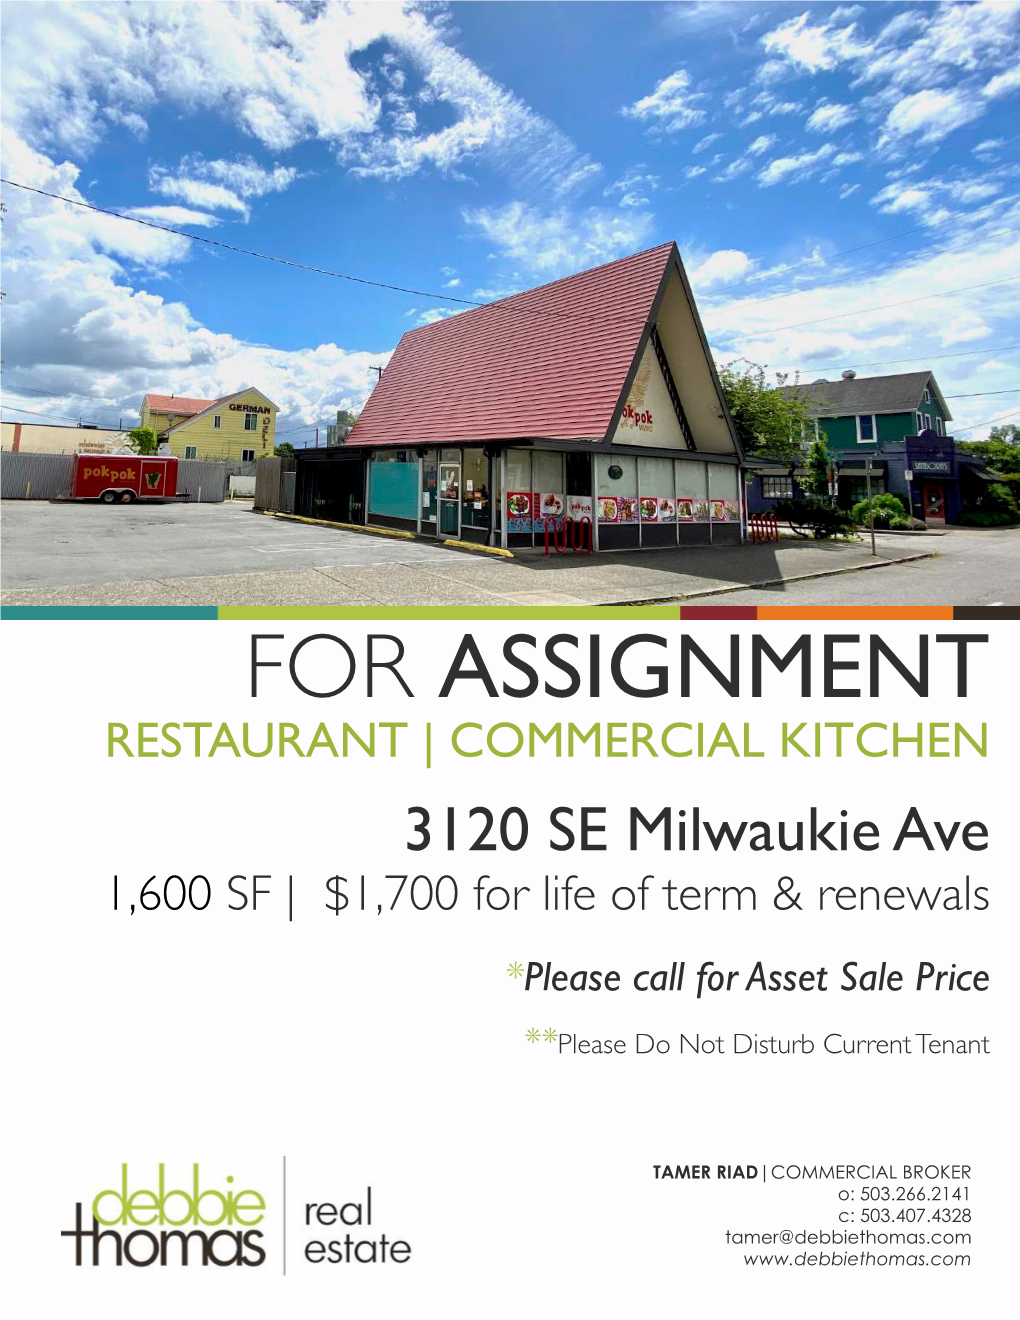 FOR ASSIGNMENT RESTAURANT | COMMERCIAL KITCHEN 3120 SE Milwaukie Ave 1,600 SF | $1,700 for Life of Term & Renewals *Please Call for Asset Sale Price